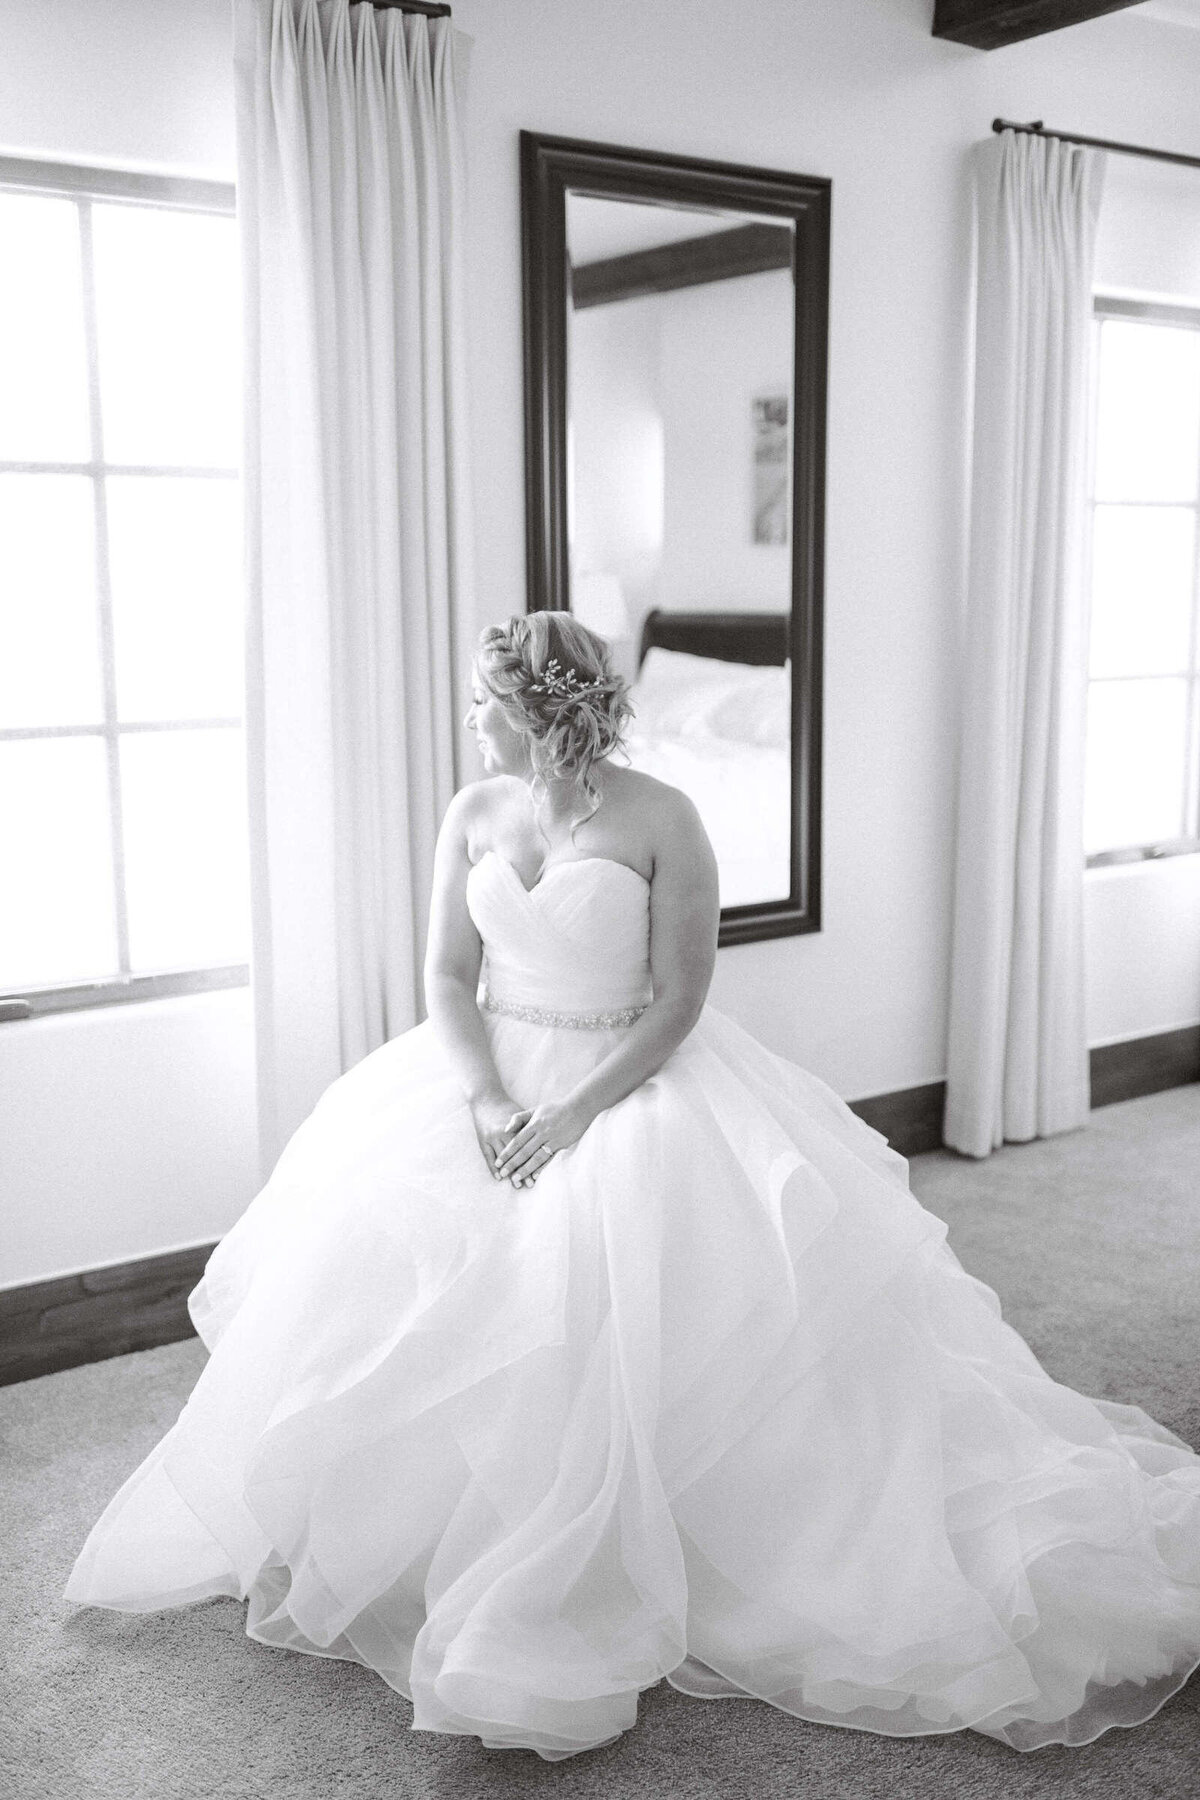 Elegant bride in fluffy wedding dress looks out window before ceremony